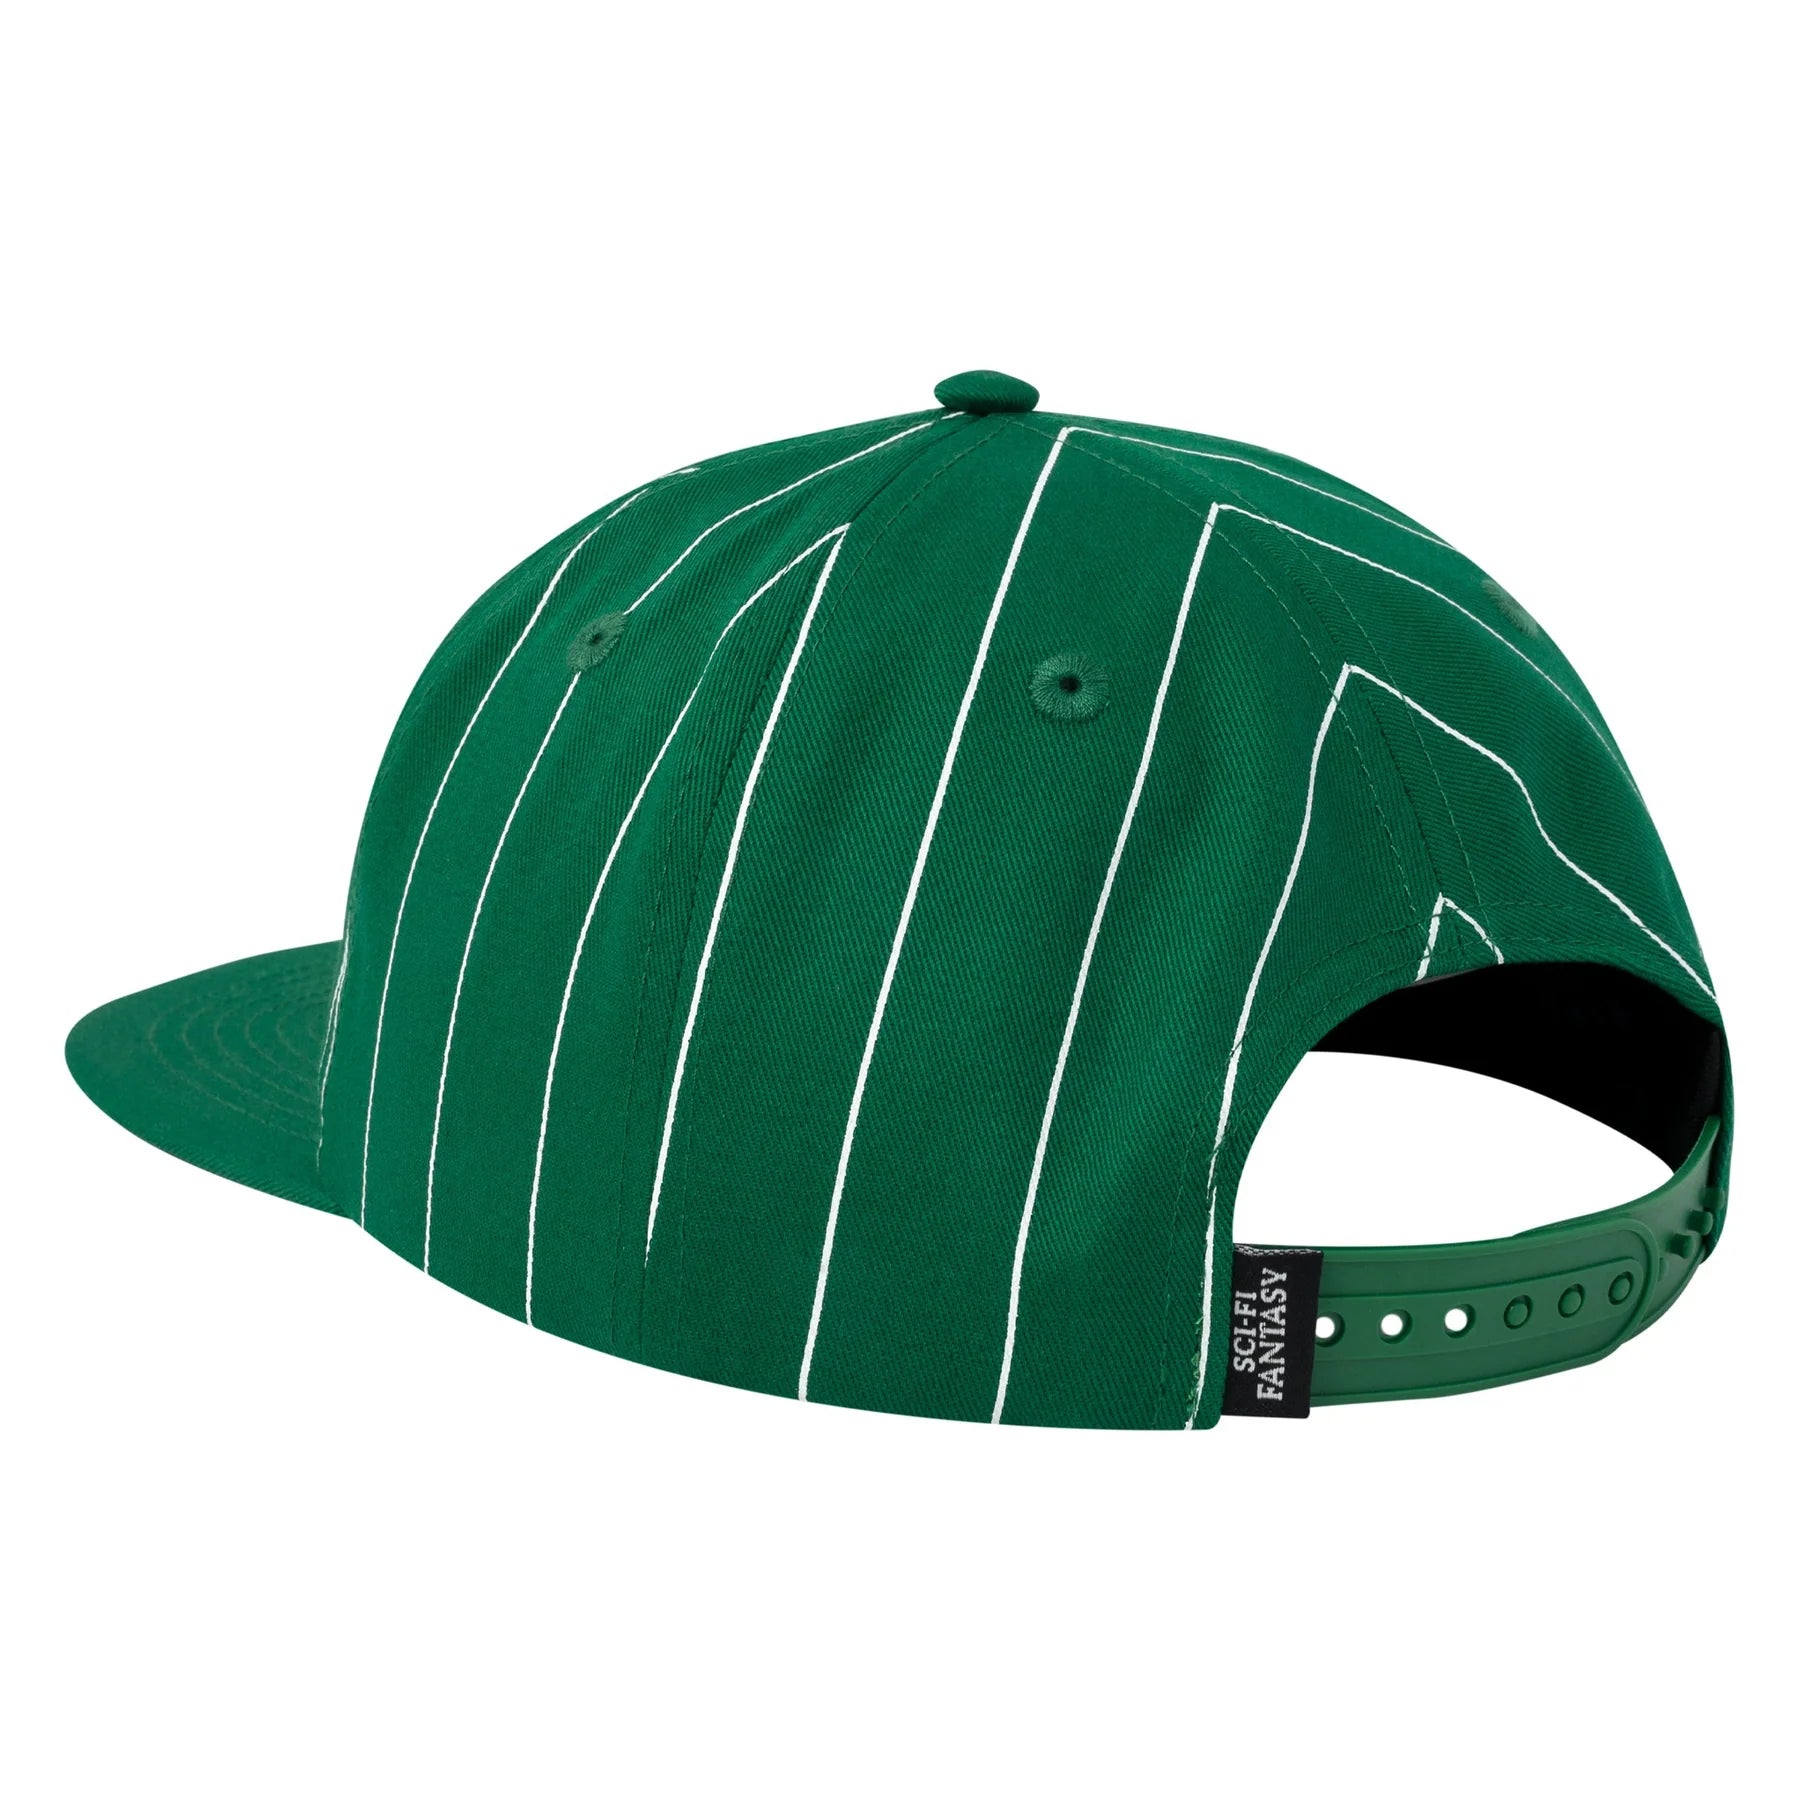 Green sci fi fantasy six panel cap with white stripes and white logo on front. Free uk shipping on orders over £50